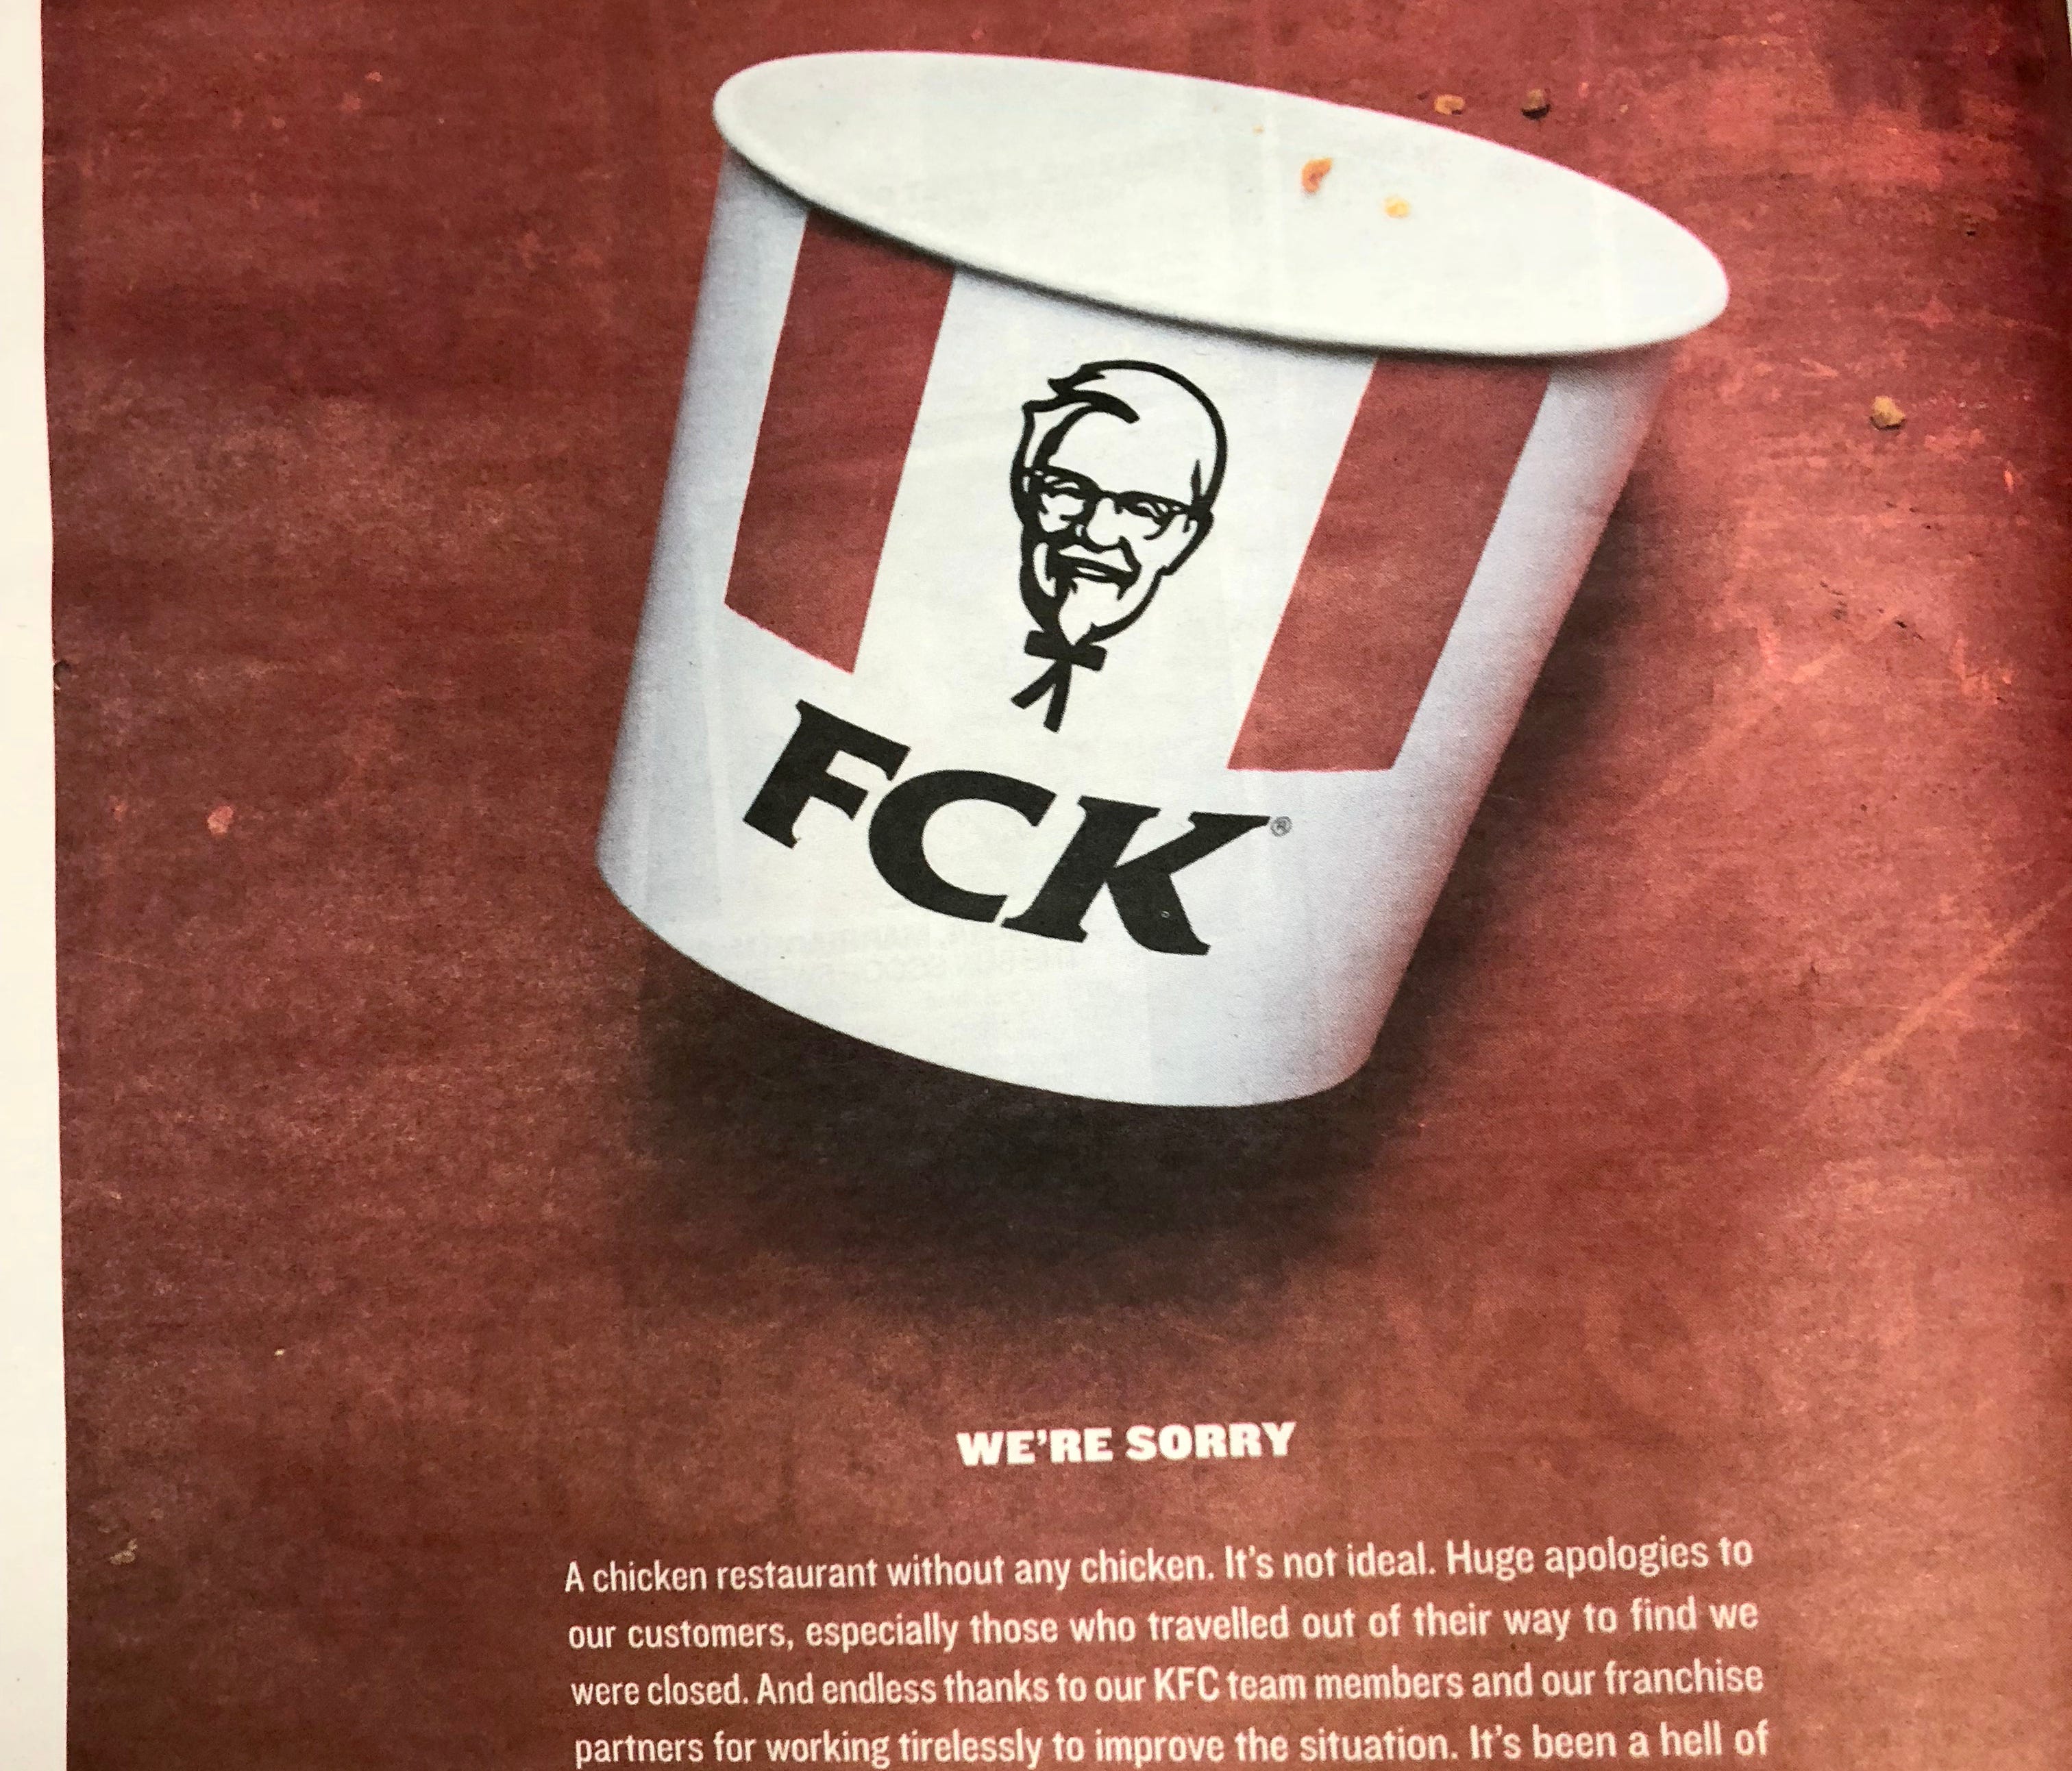 KFC took out ads in the Metro and The Sun newspapers in London with an image showing an empty bucket of chicken. Instead of the KFC logo, the letters on the side of the bucket were rearranged to read 